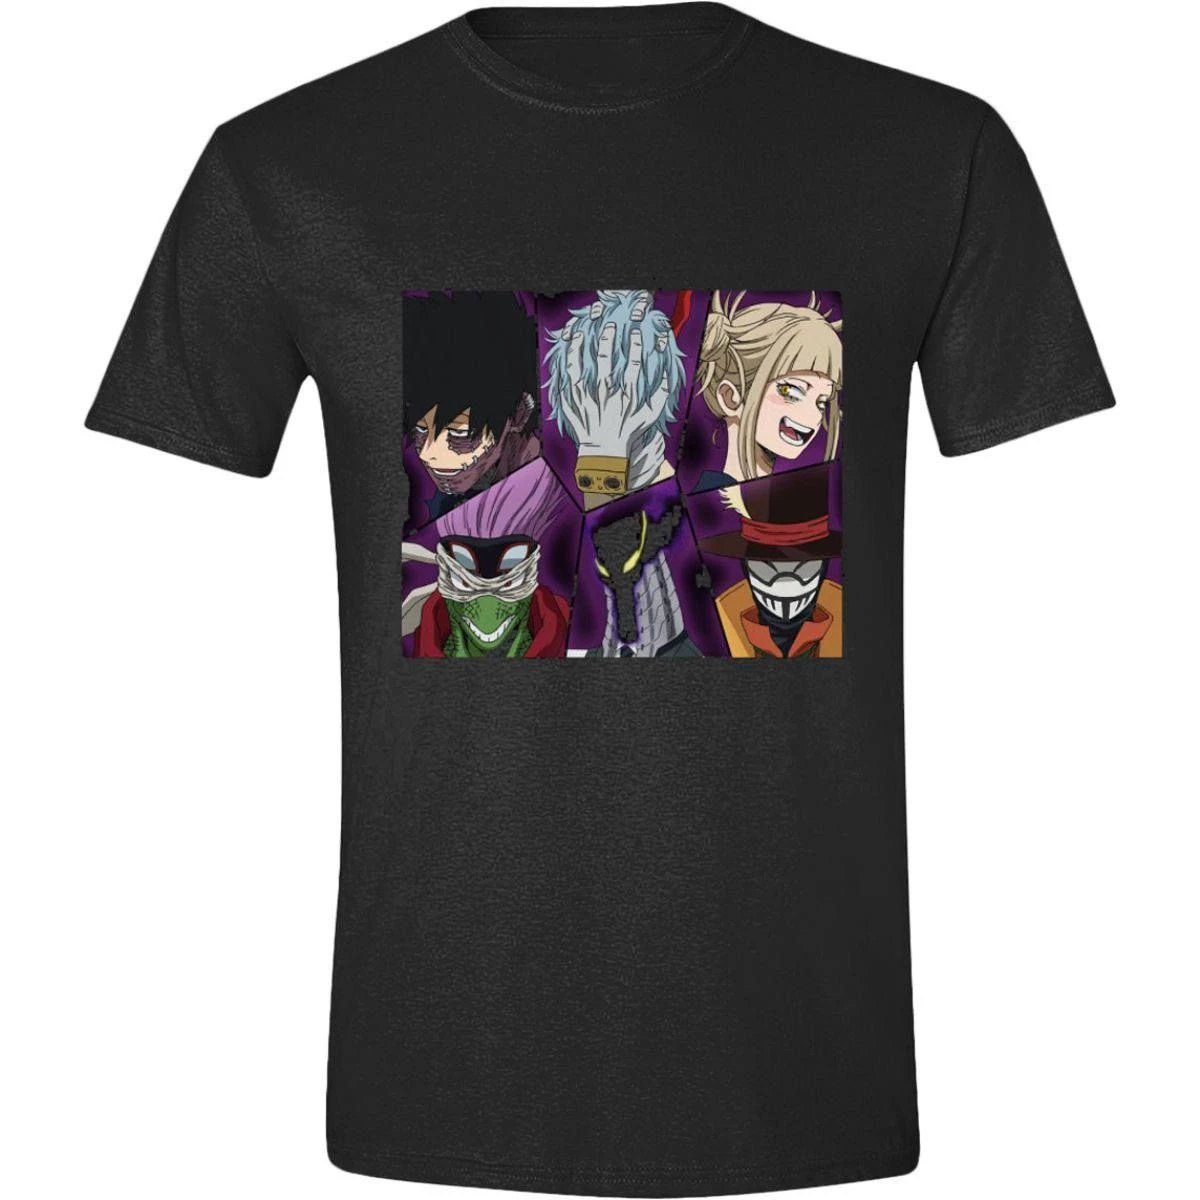 My Hero Academia T-Shirt Group Faces Size S PCMerch